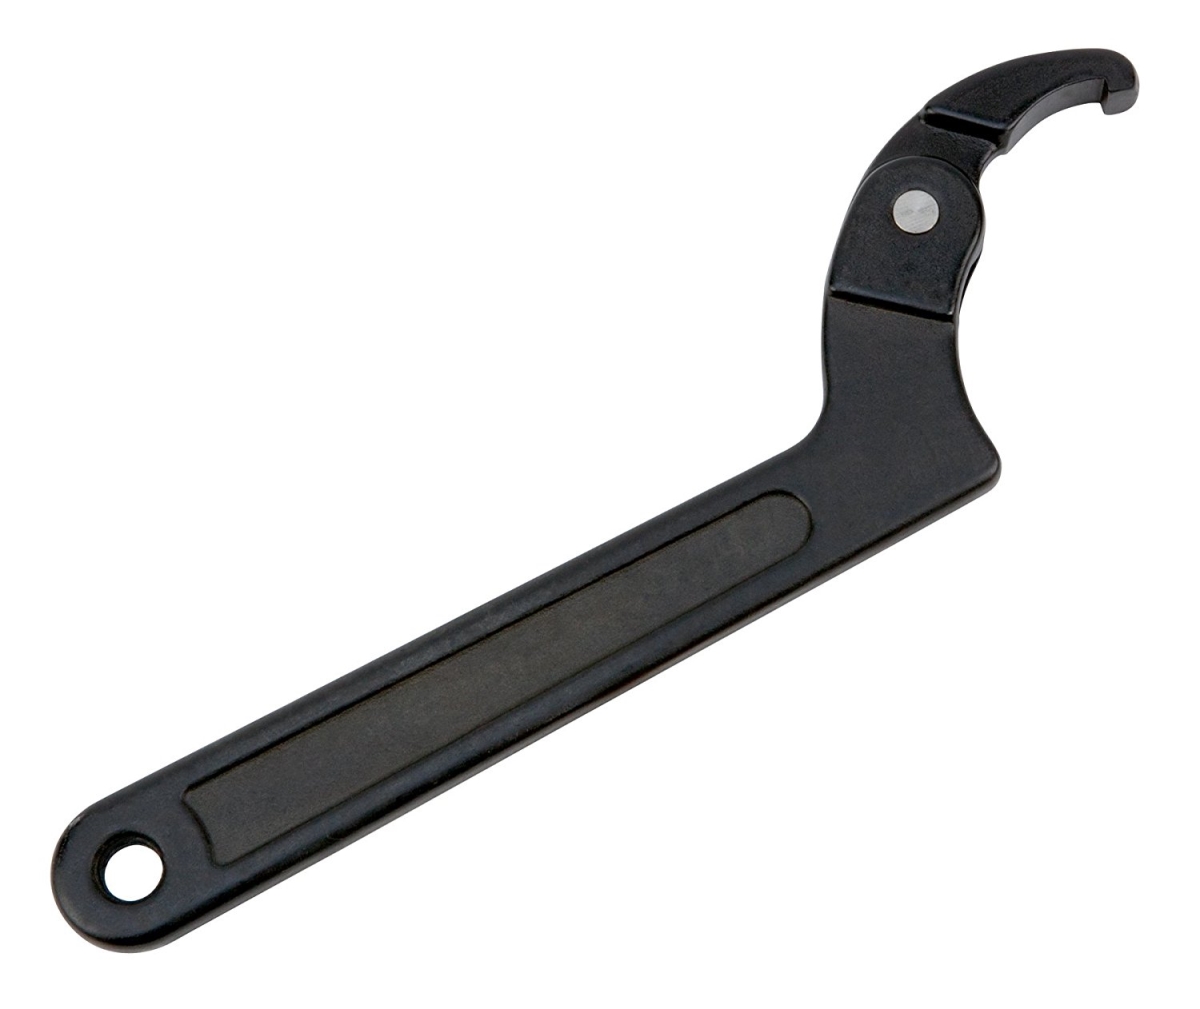 W30783 1.25-3 In. Adjustable Hook Wrench